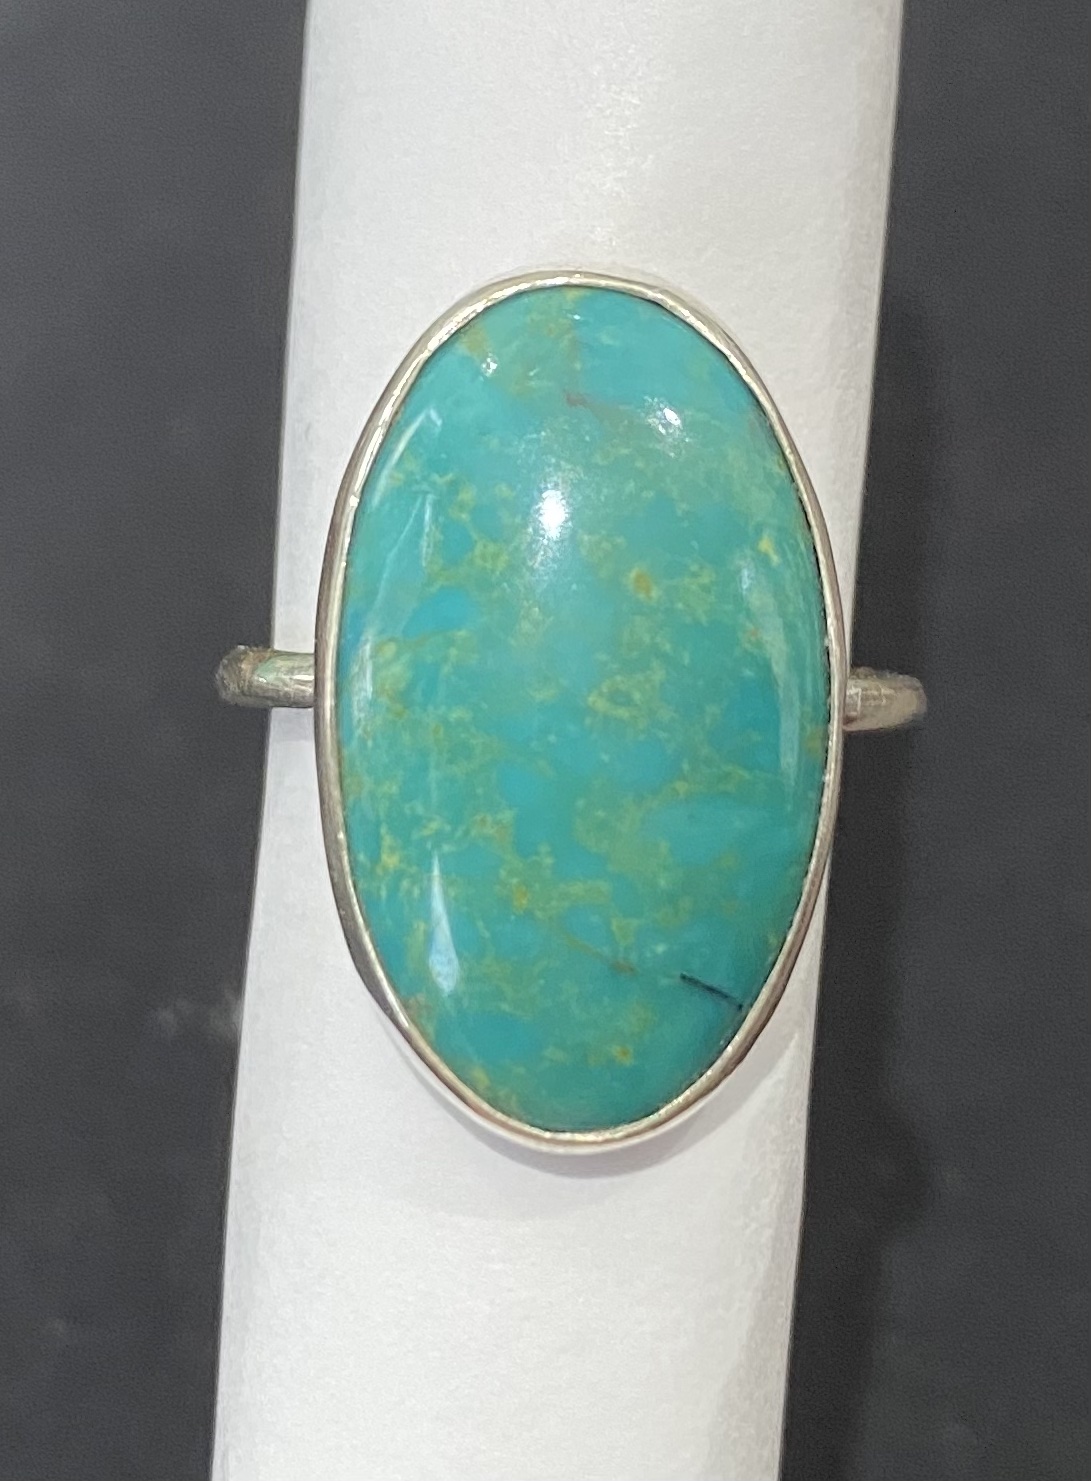 Turquoise Ring. EM149
Sterling
$65